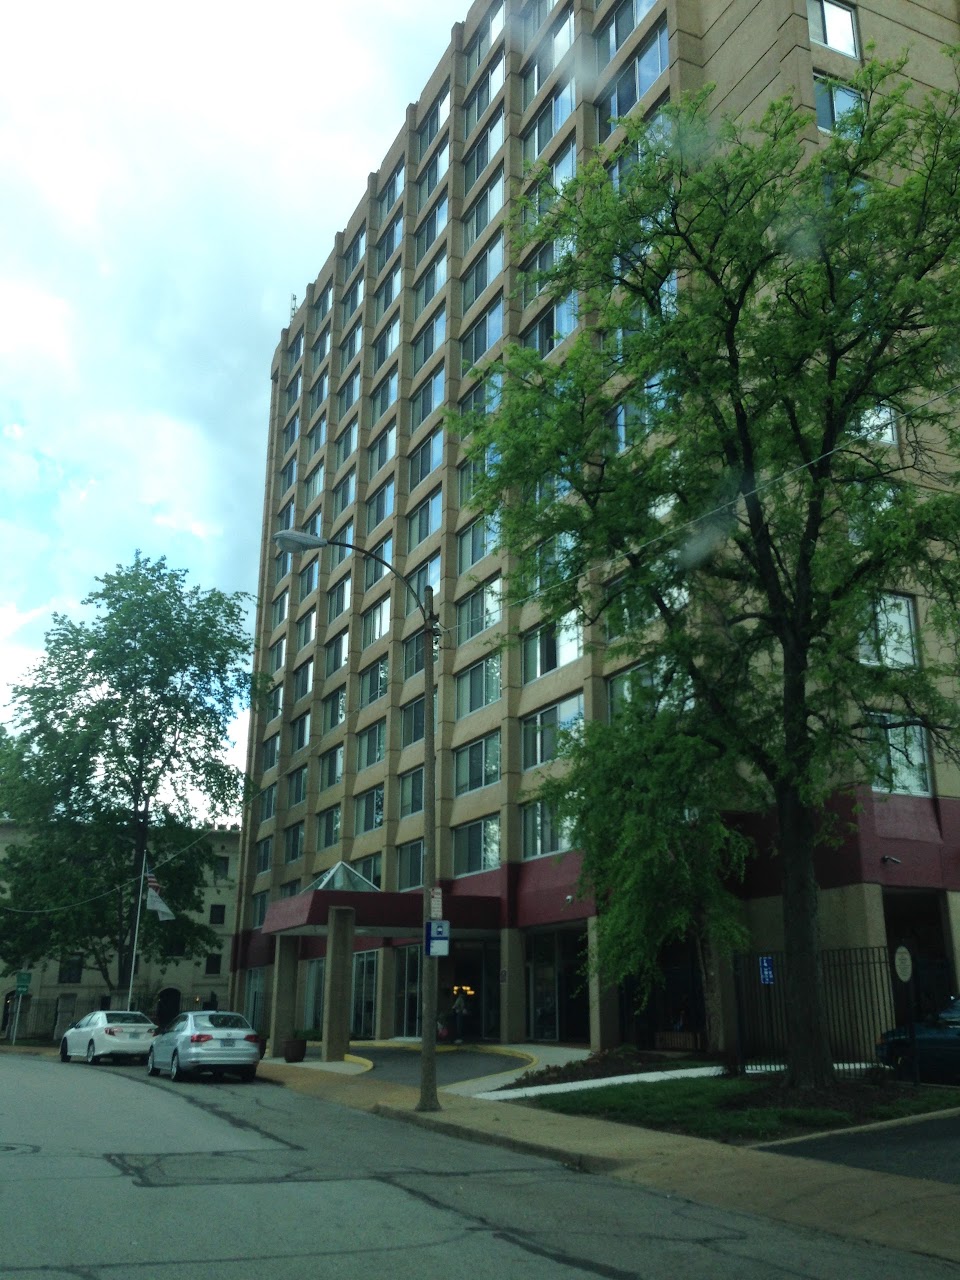 Photo of PARKVIEW PLACE. Affordable housing located at 701 WESTGATE AVE UNIVERSITY CITY, MO 63130